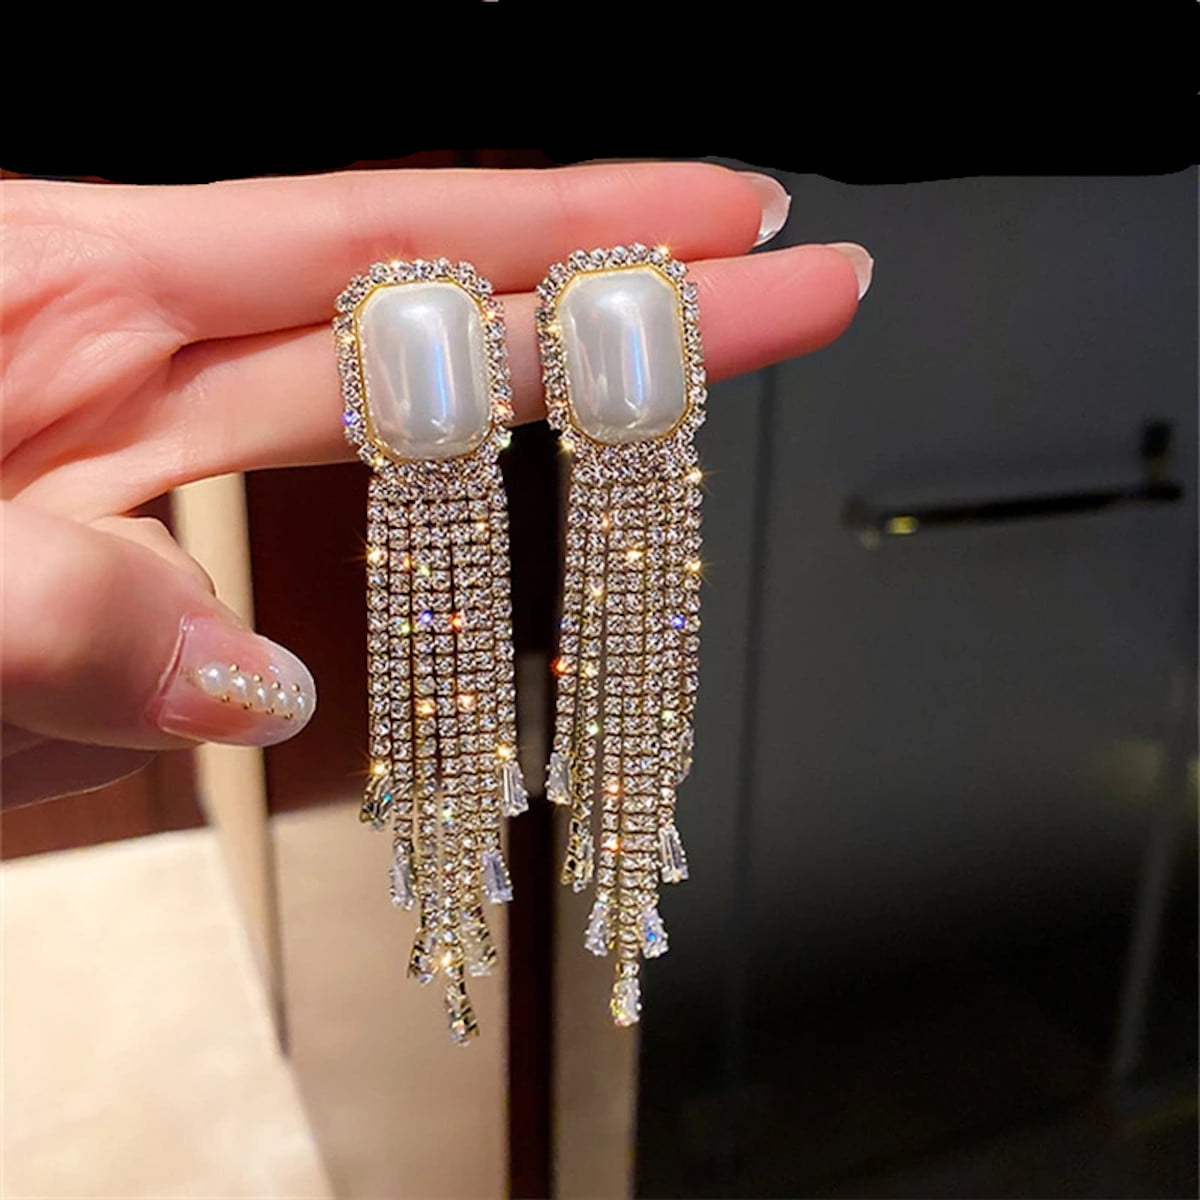 Party Wear Earrings: Buy From 1000+ Designs Online| Melorra-sgquangbinhtourist.com.vn